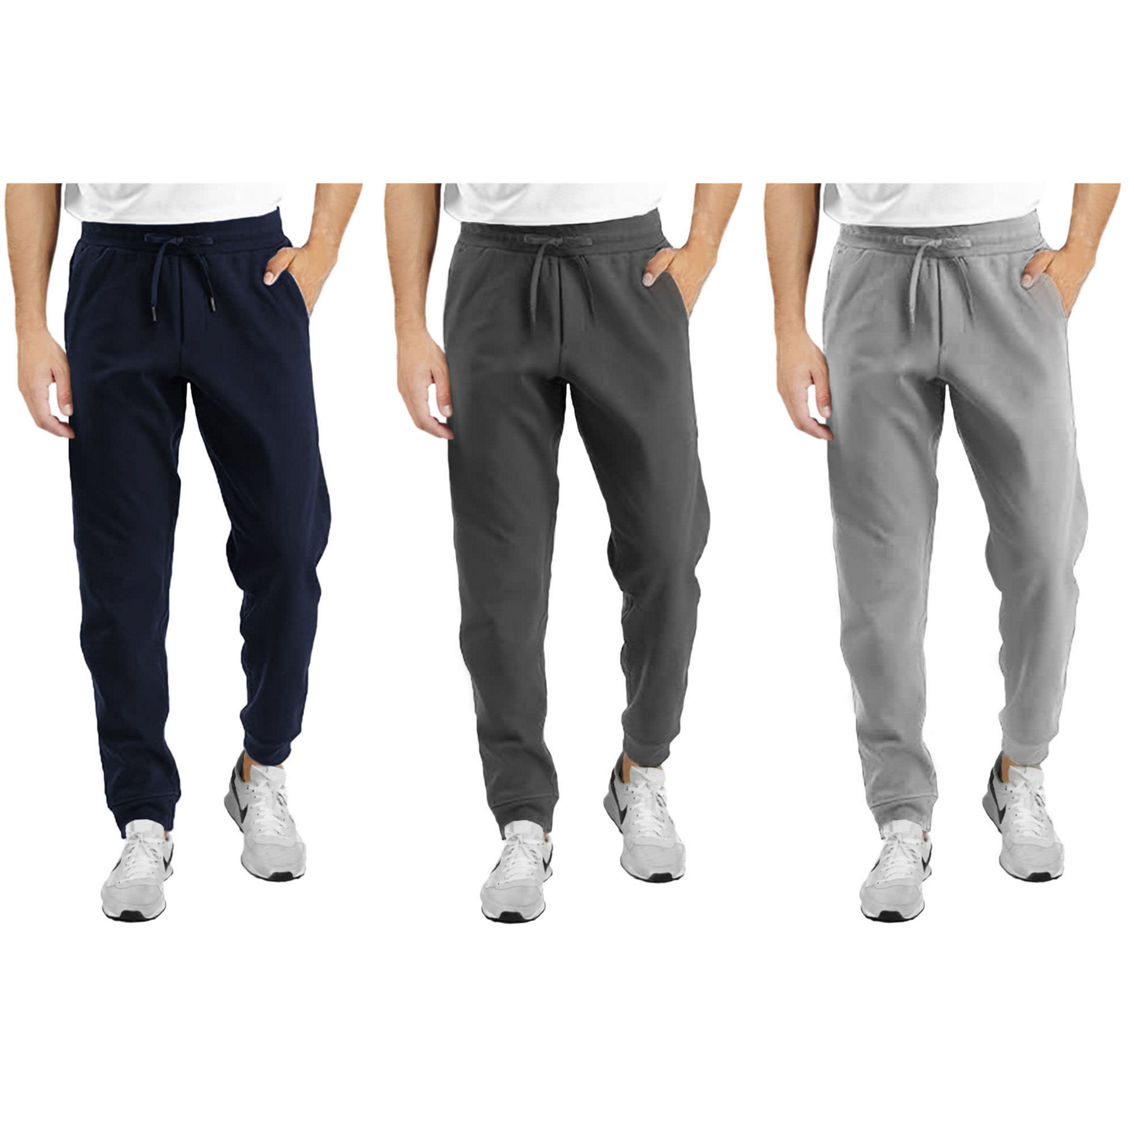 Galaxy By Harvic Men's French Terry Jogger Lounge Pants-3 Pack | Pants ...